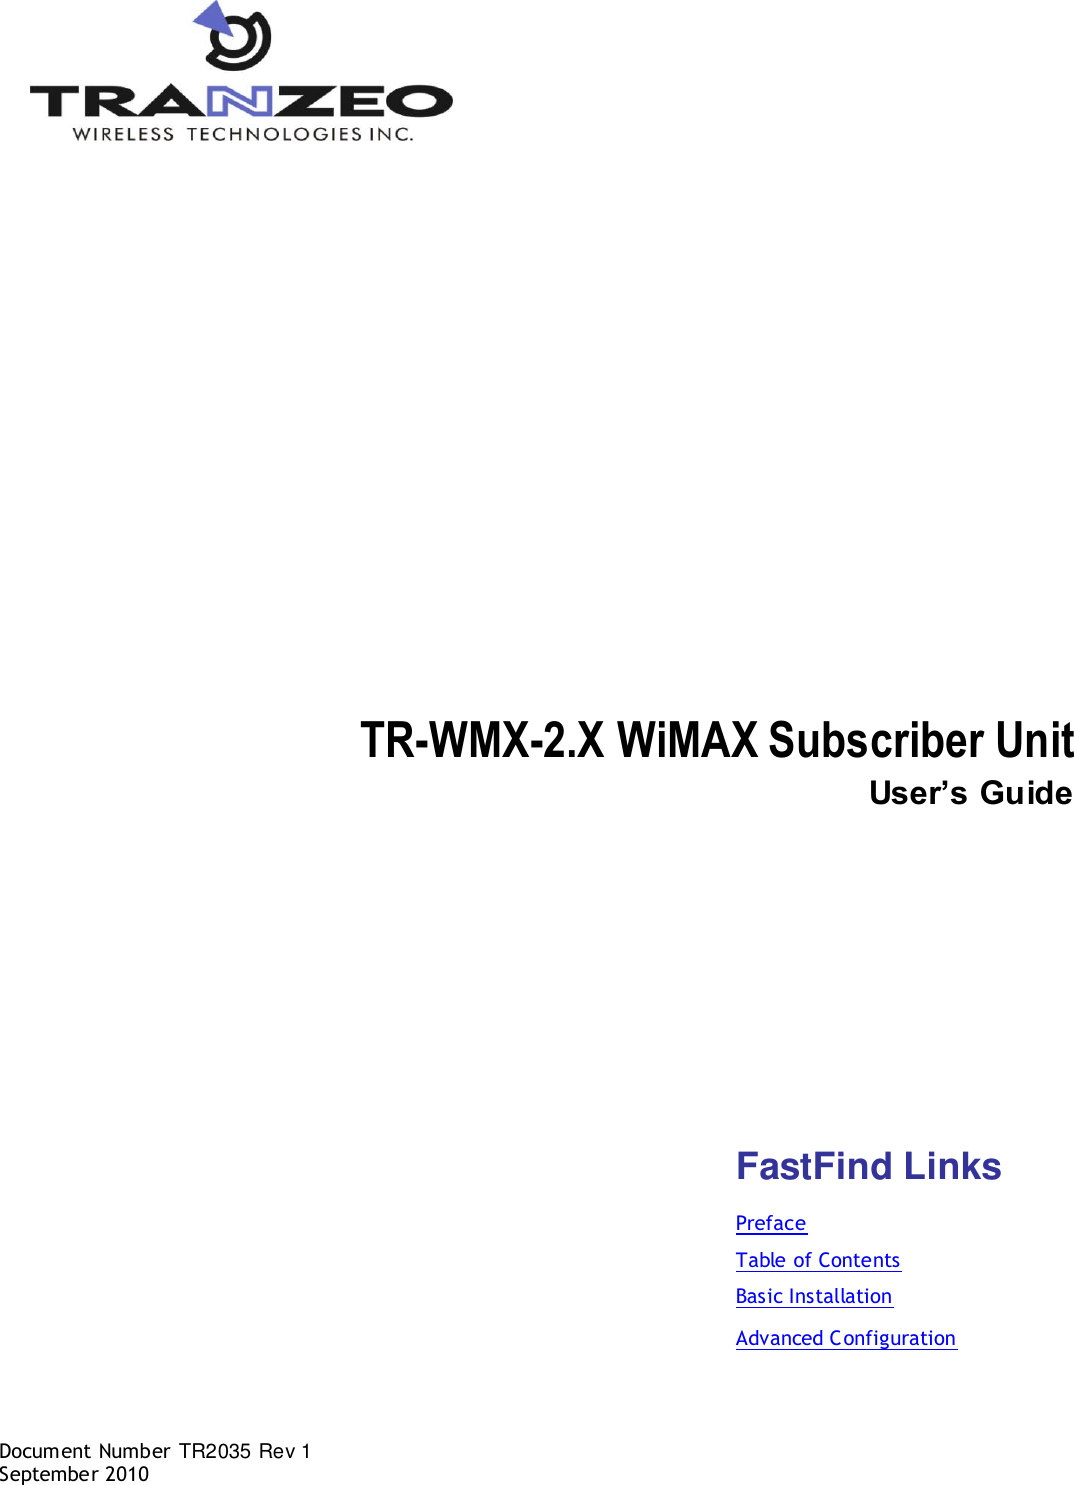  TR-WMX-2.X WiMAX Subscriber Unit User’s Guide        Document Number TR2035 Rev 1 September 2010 FastFind Links Preface Table of Contents Basic Installation Advanced Configuration 